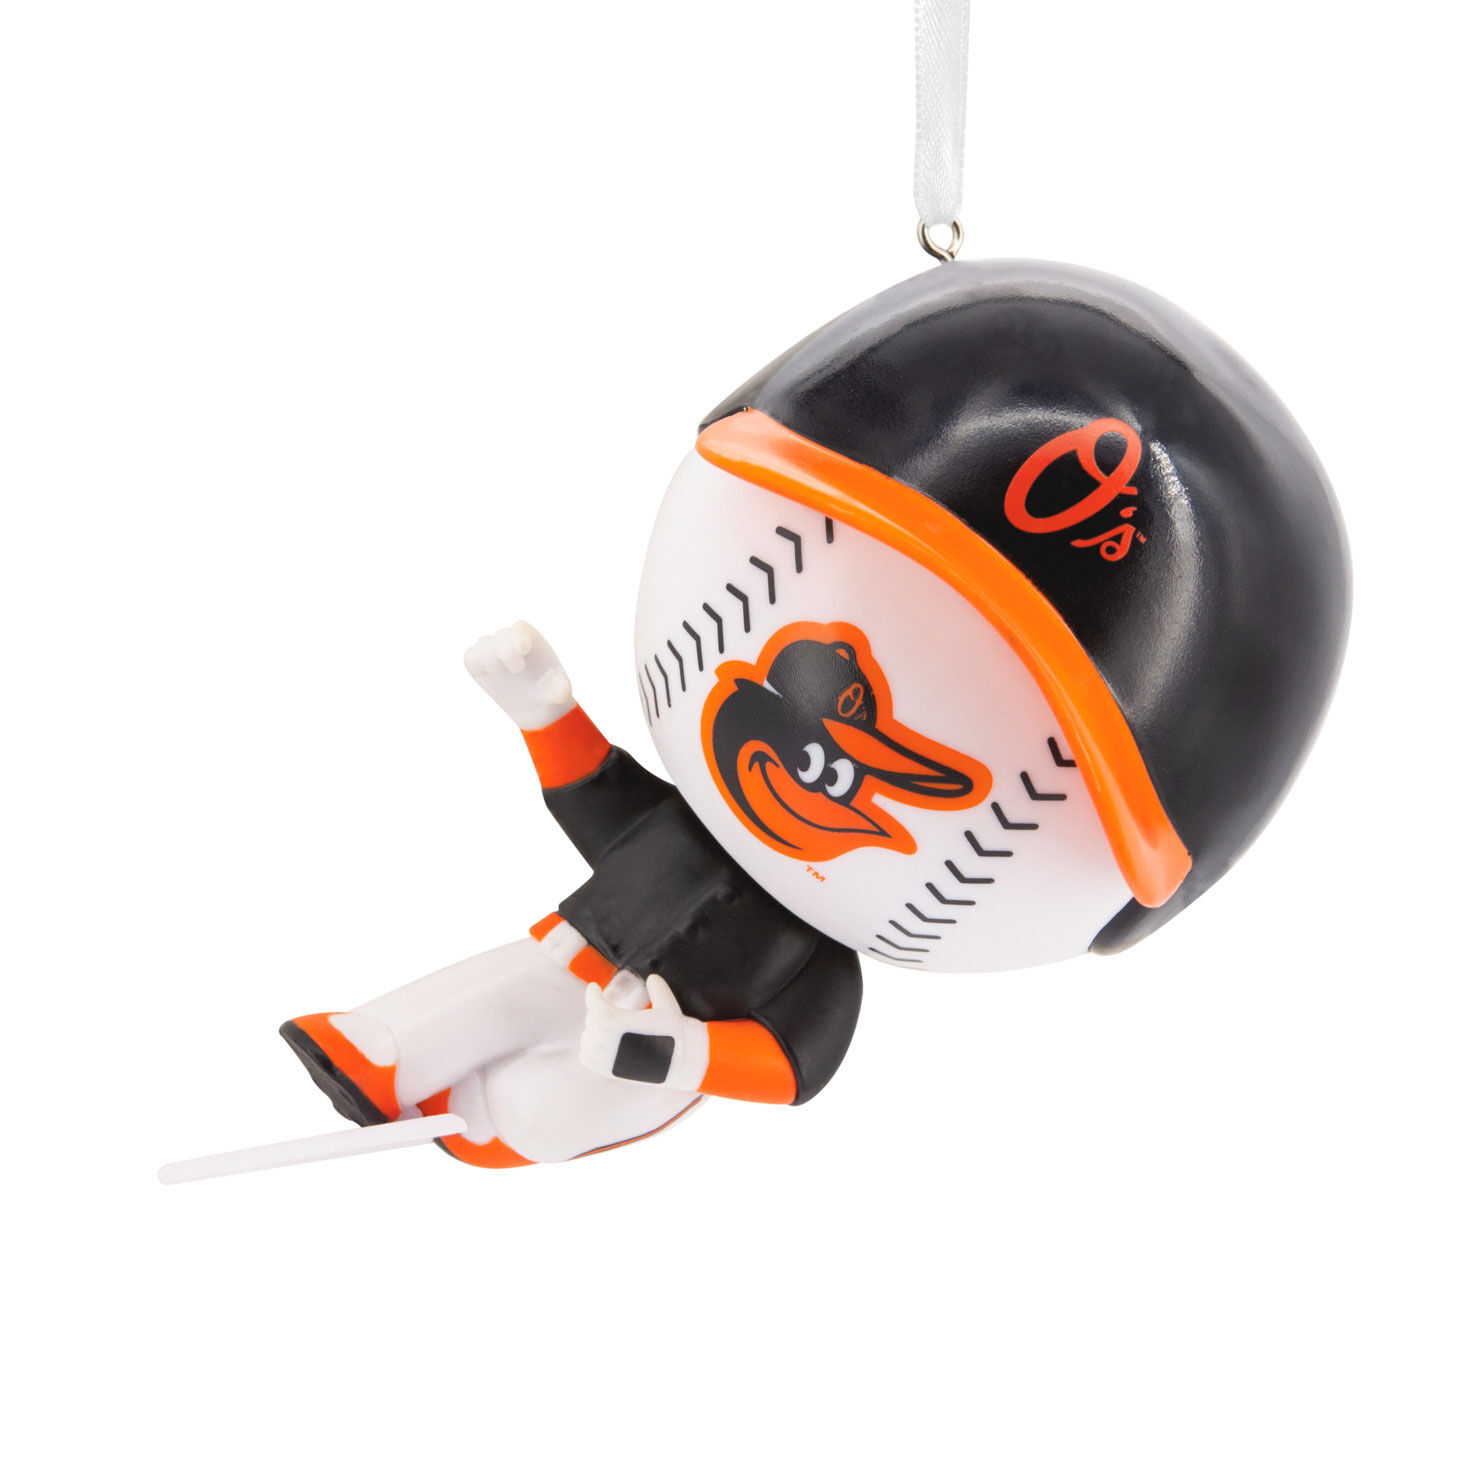  Baltimore Orioles Collection Party Invitation & Thank You  Card Set : Toys & Games